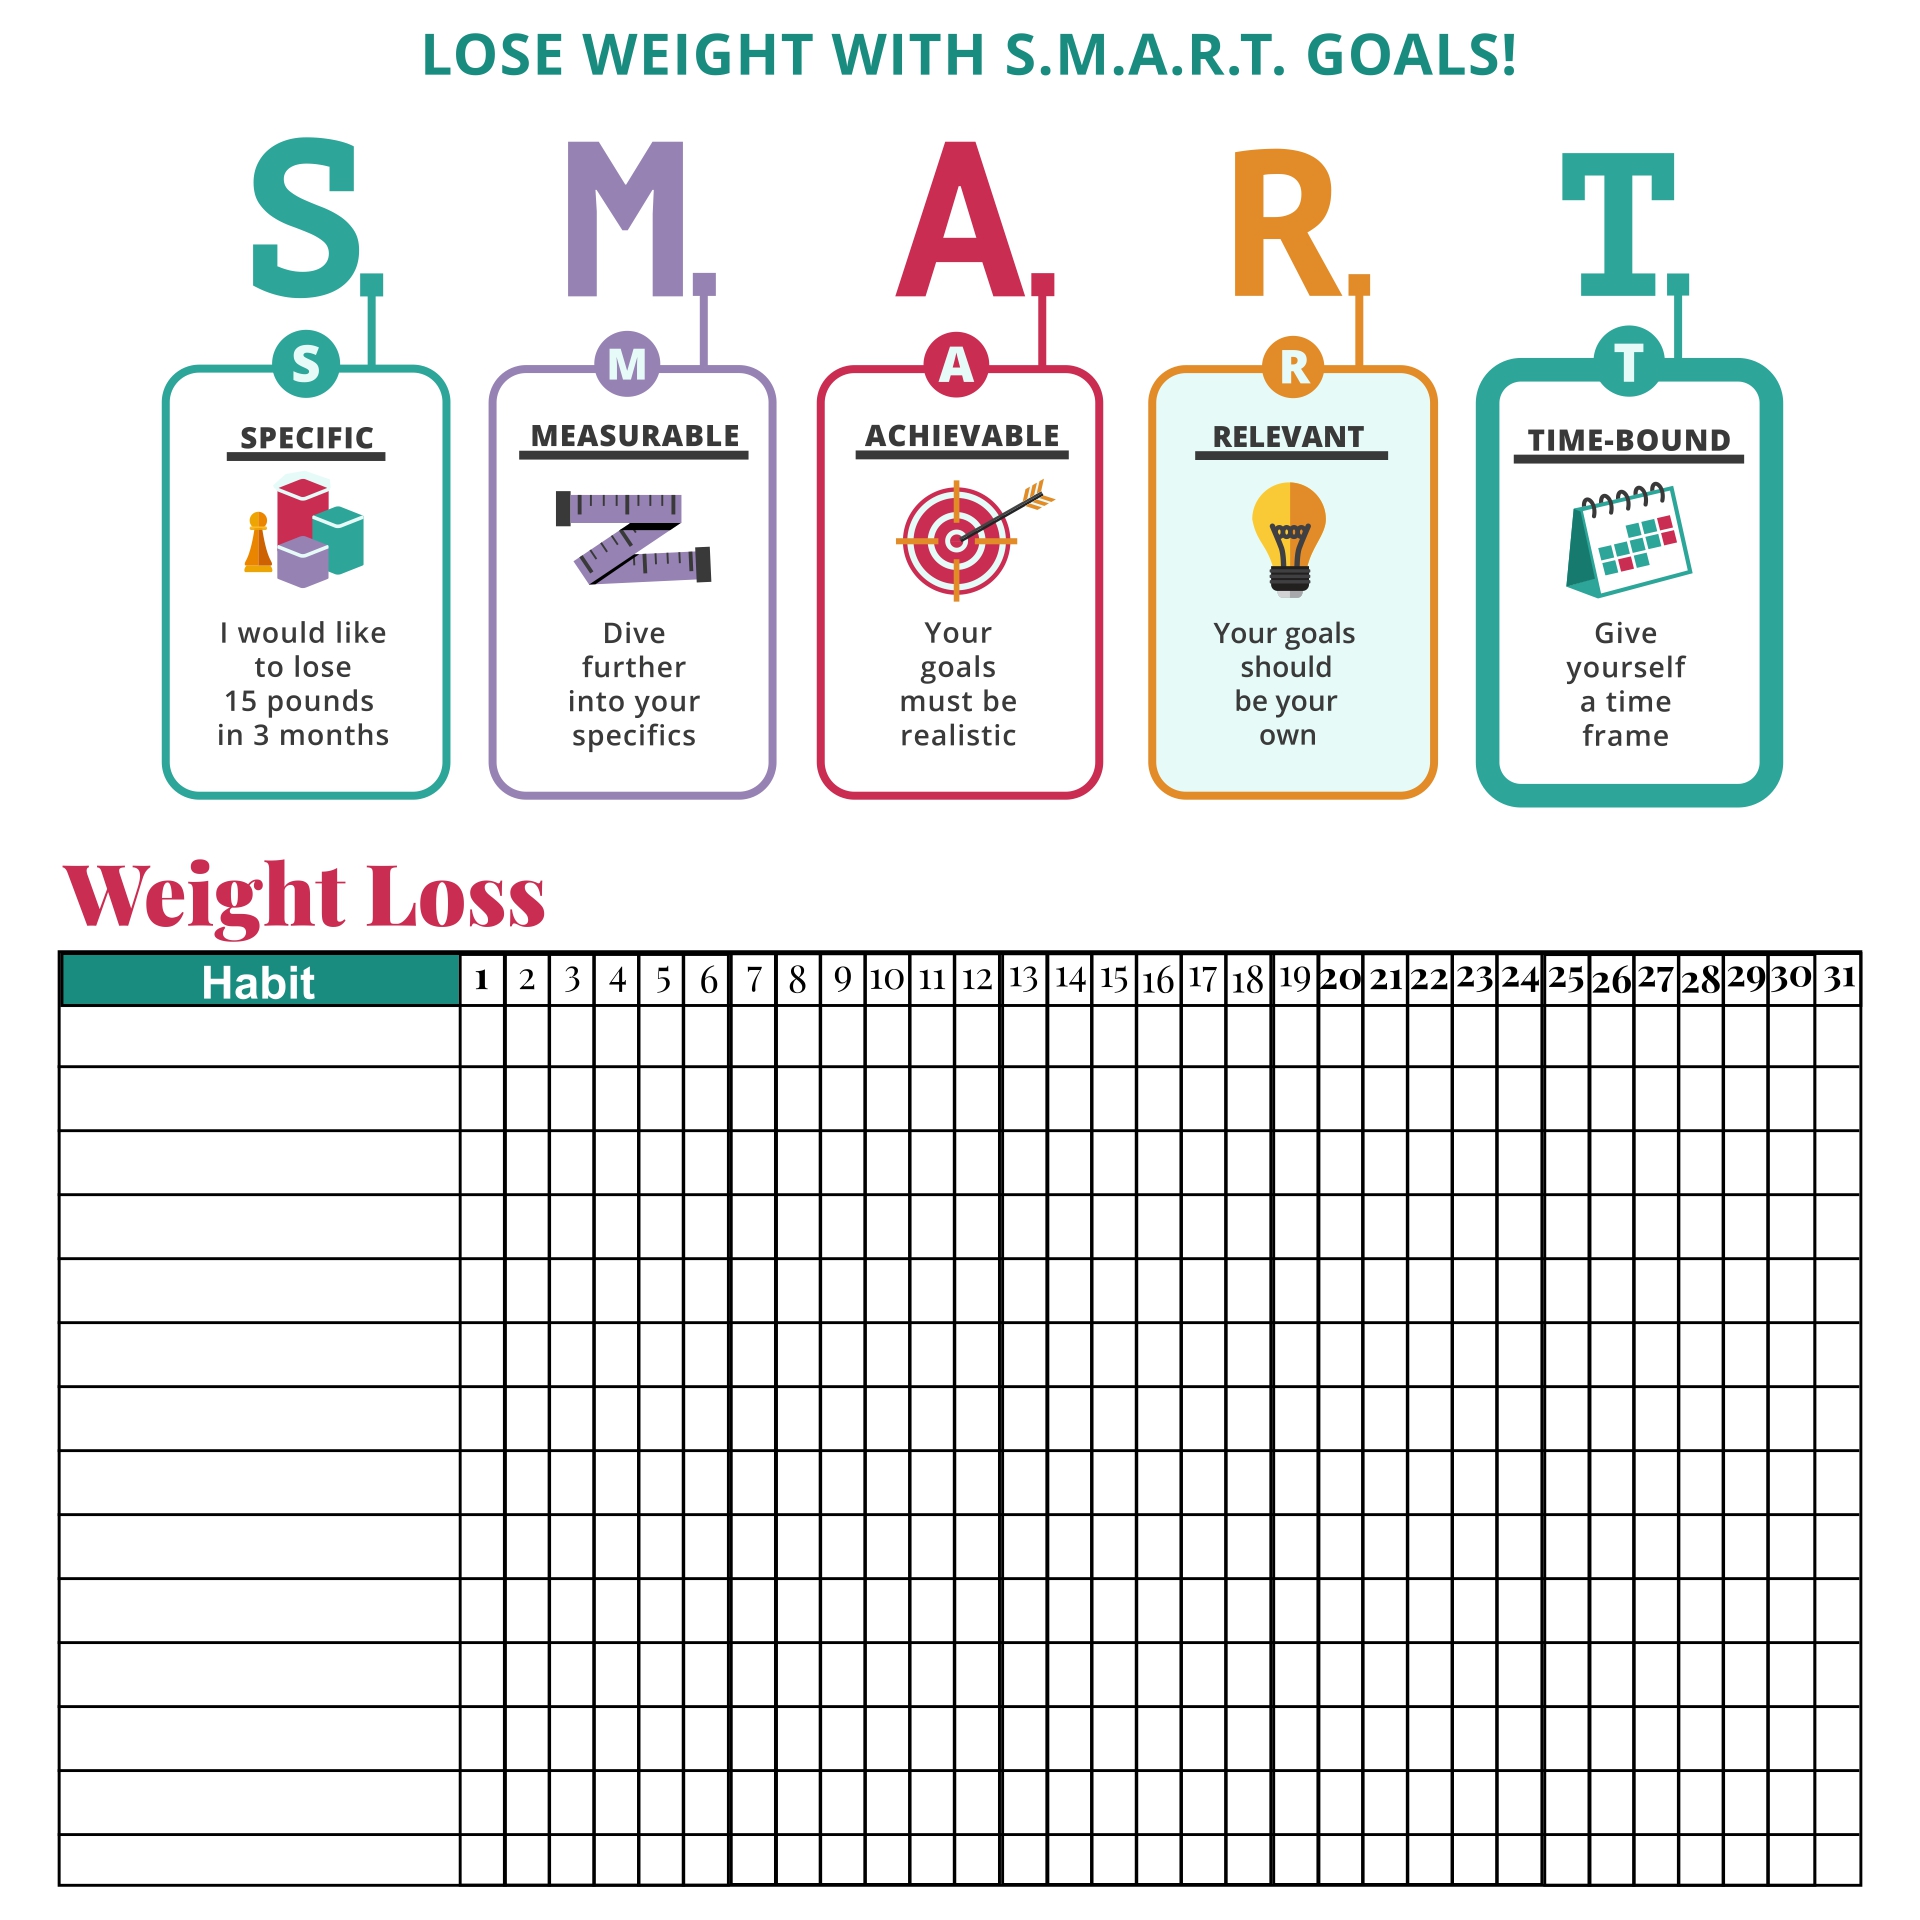 Weight Loss Tracker Printable Template Printable Templates